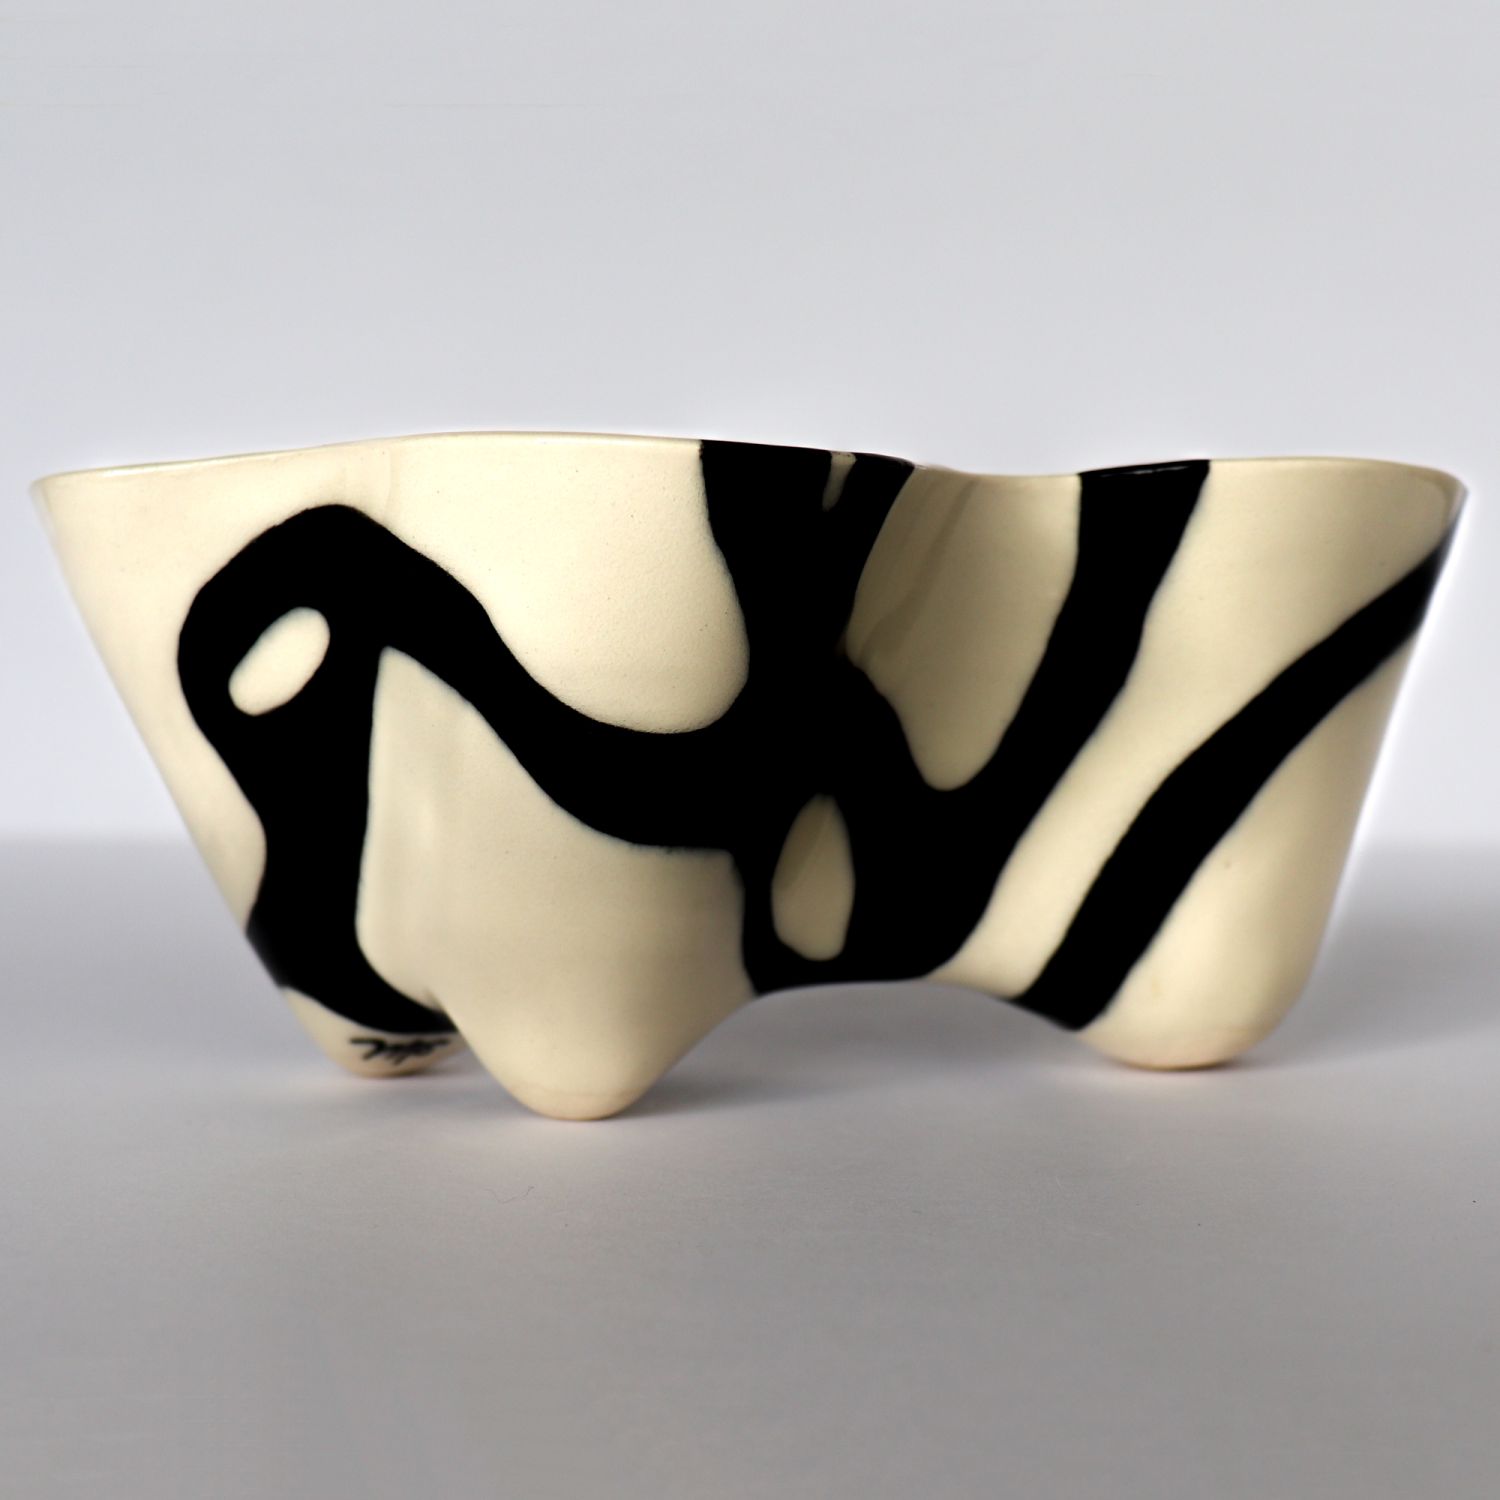 Alana Marcoccia: Interconnected Sculptural Bowl Product Image 12 of 13